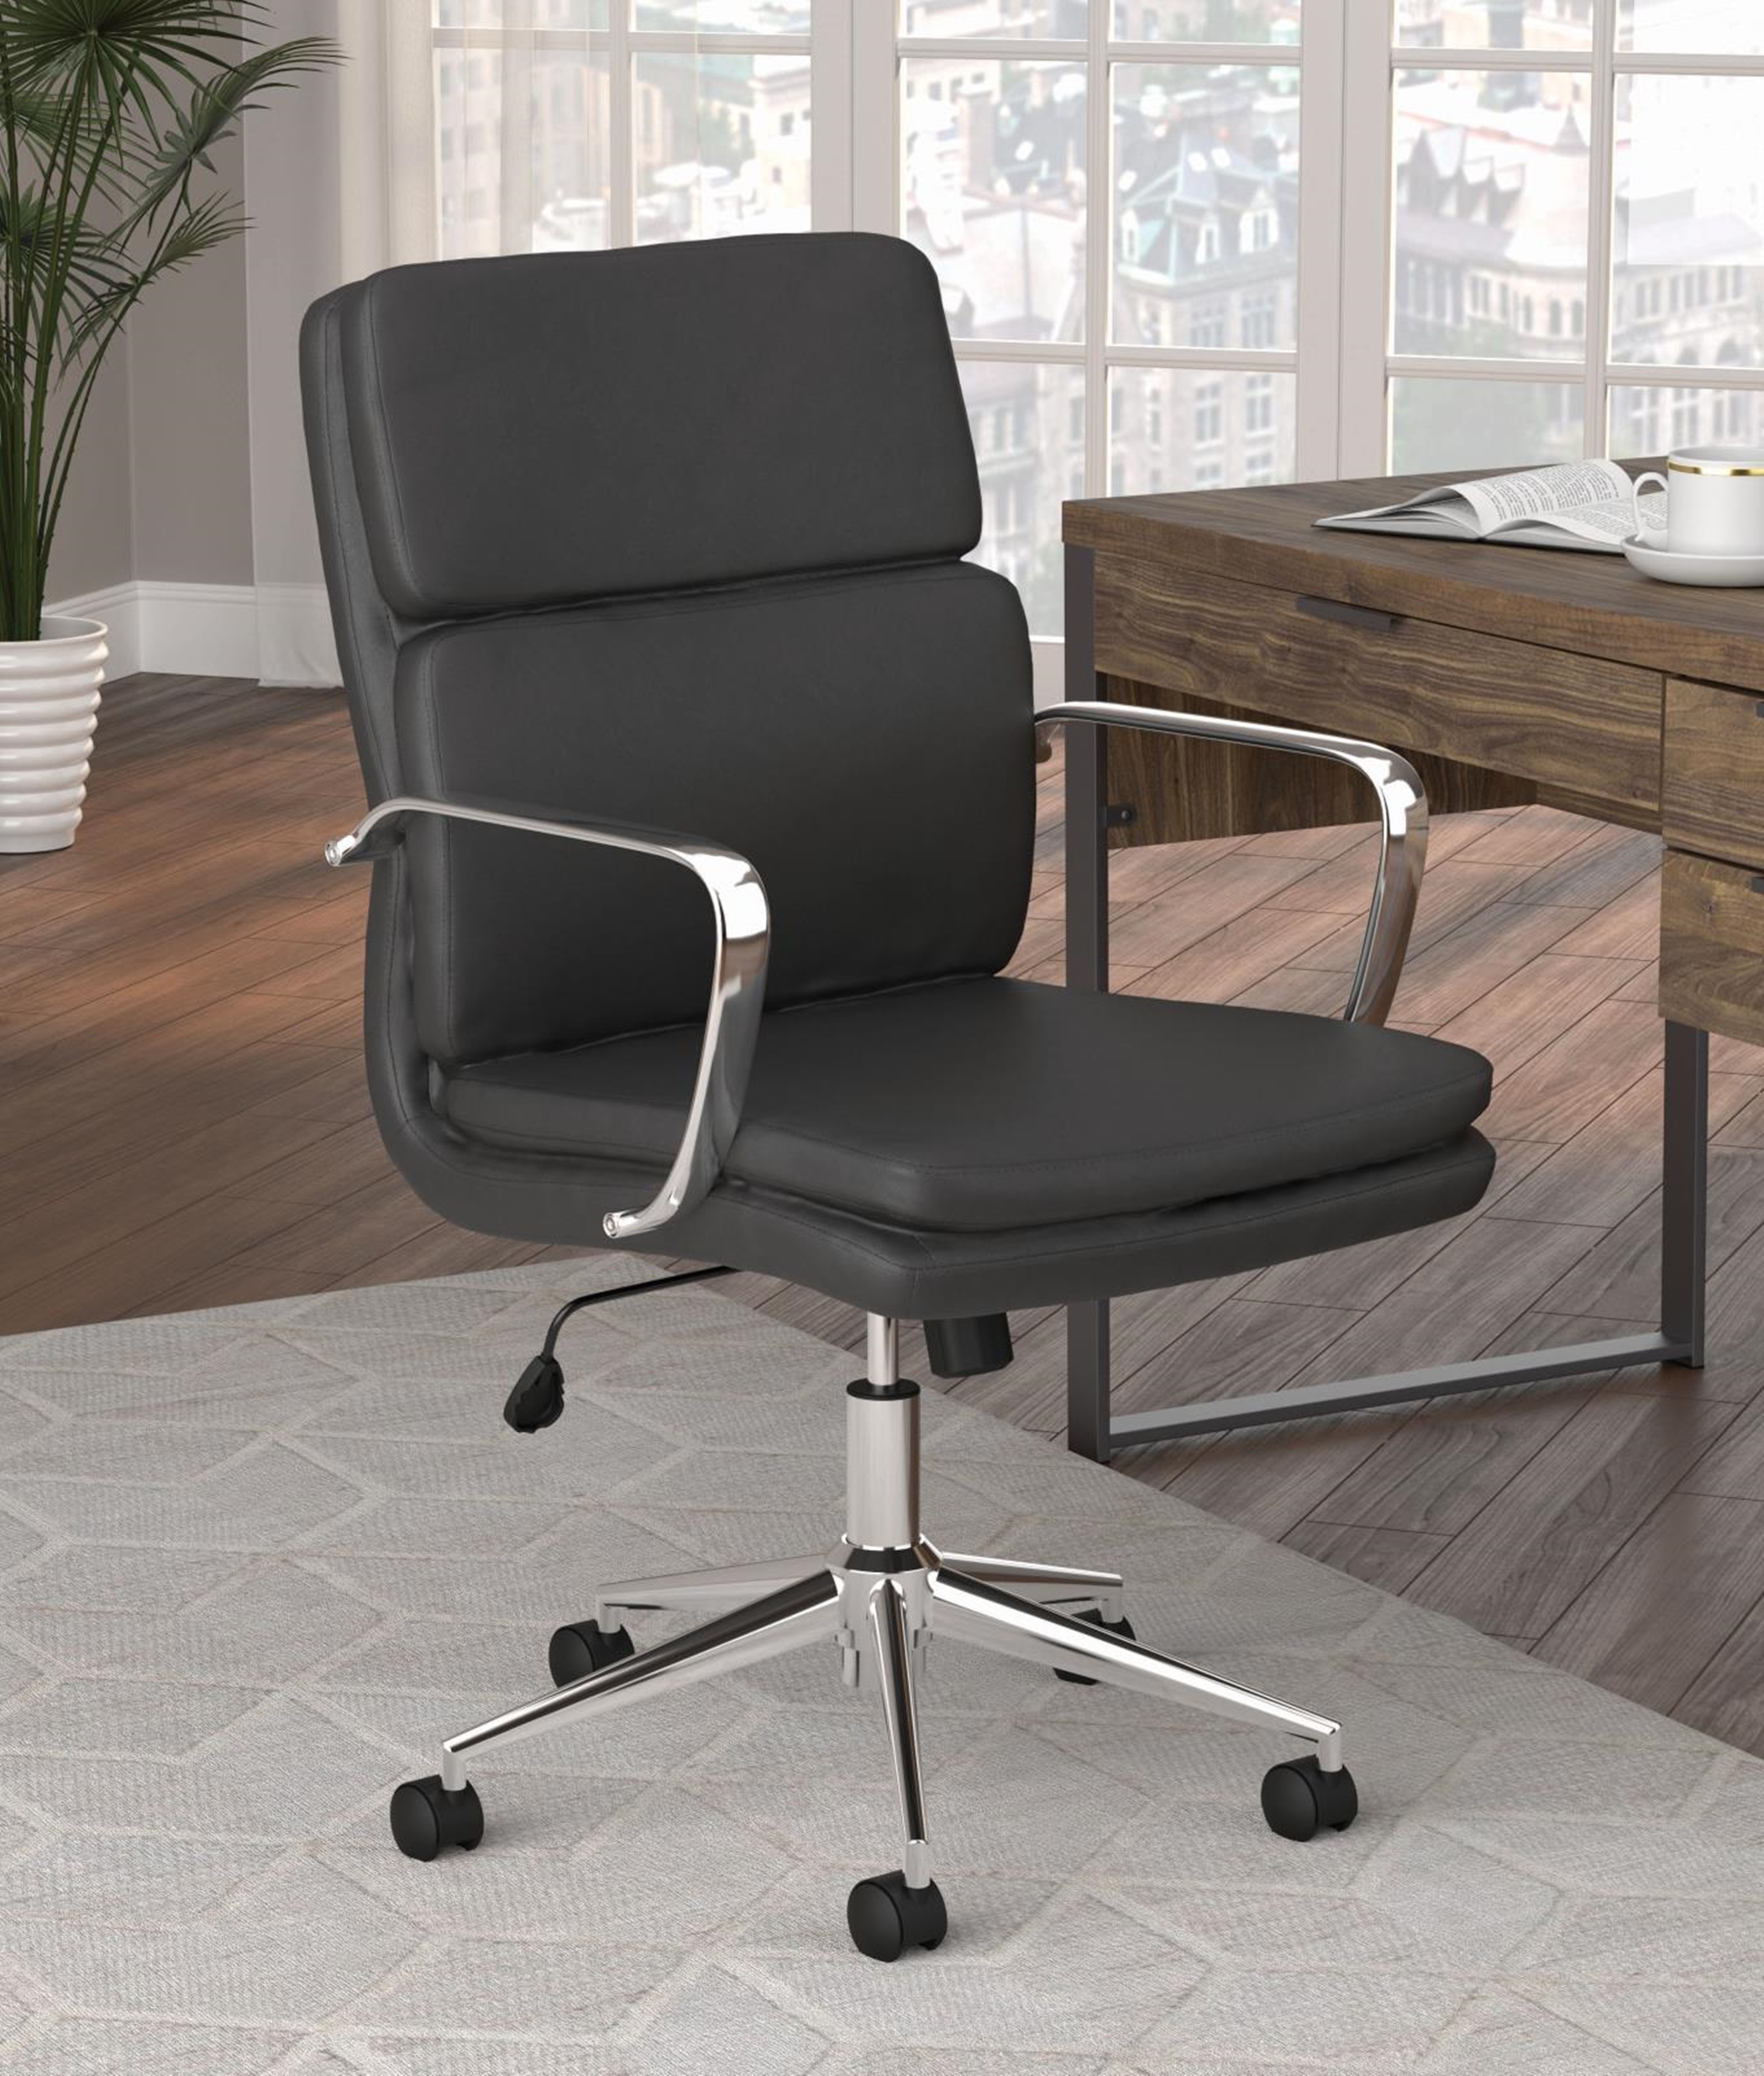 801765 - Office Chair